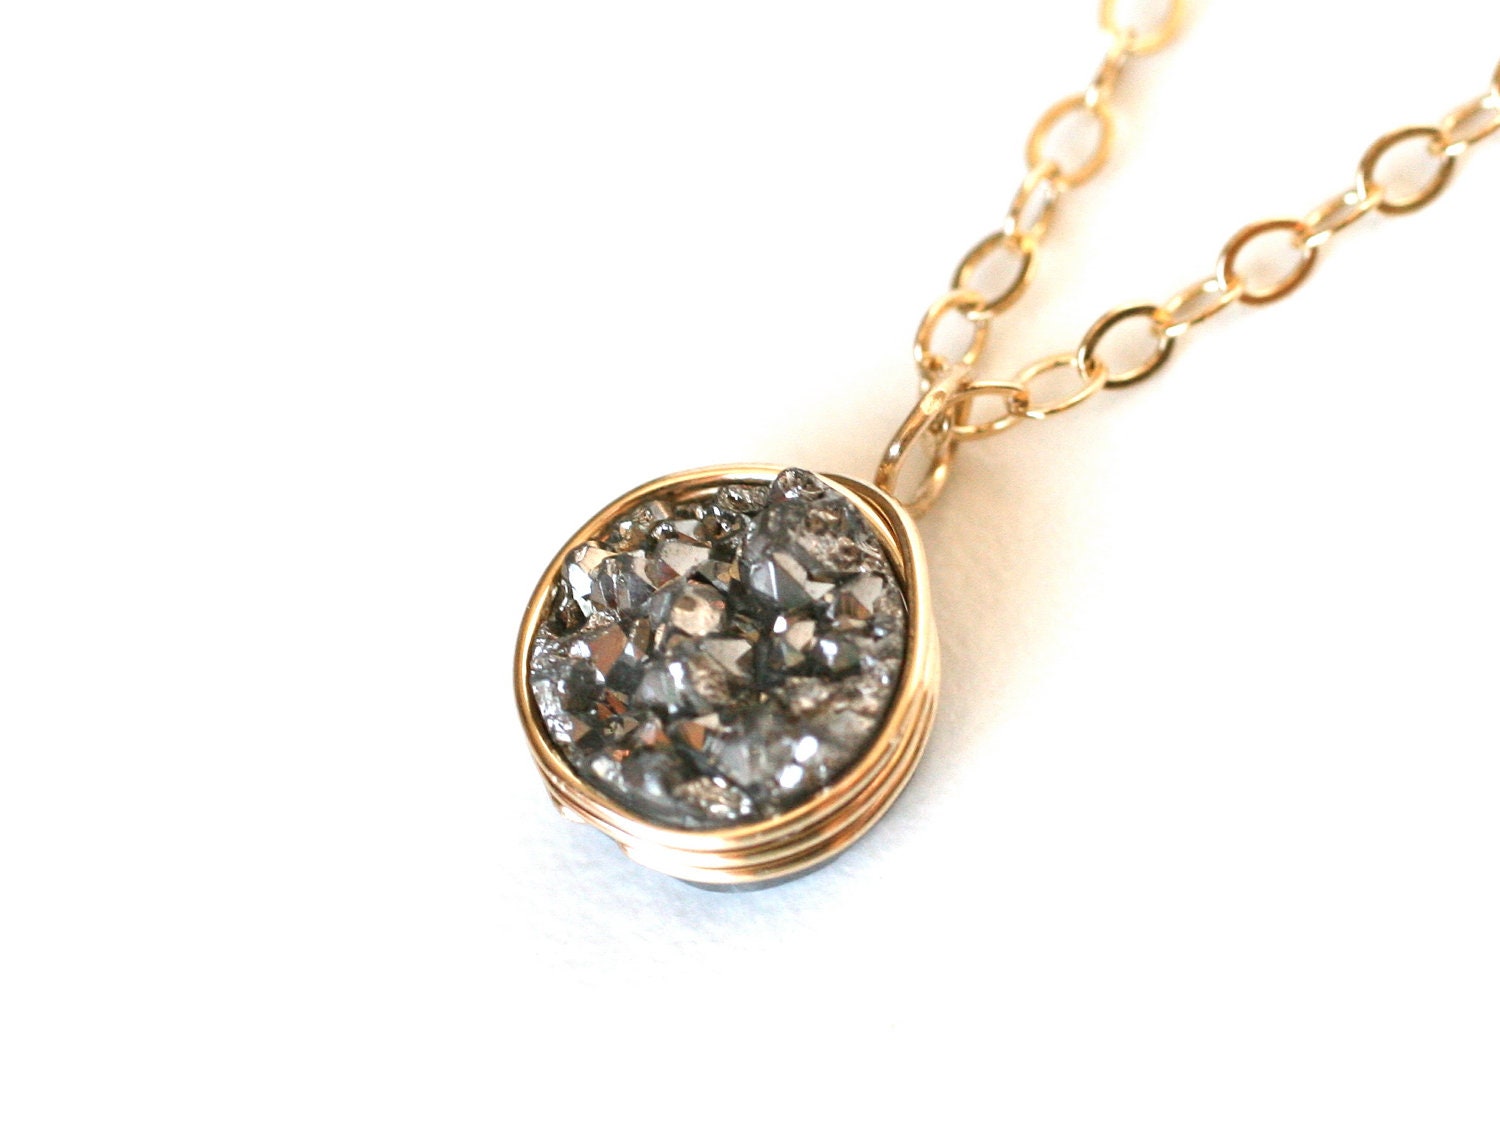 Stunning Gray Druzy Quartz Necklace Wire Wrapped 14k Gold Filled - Gift for Her